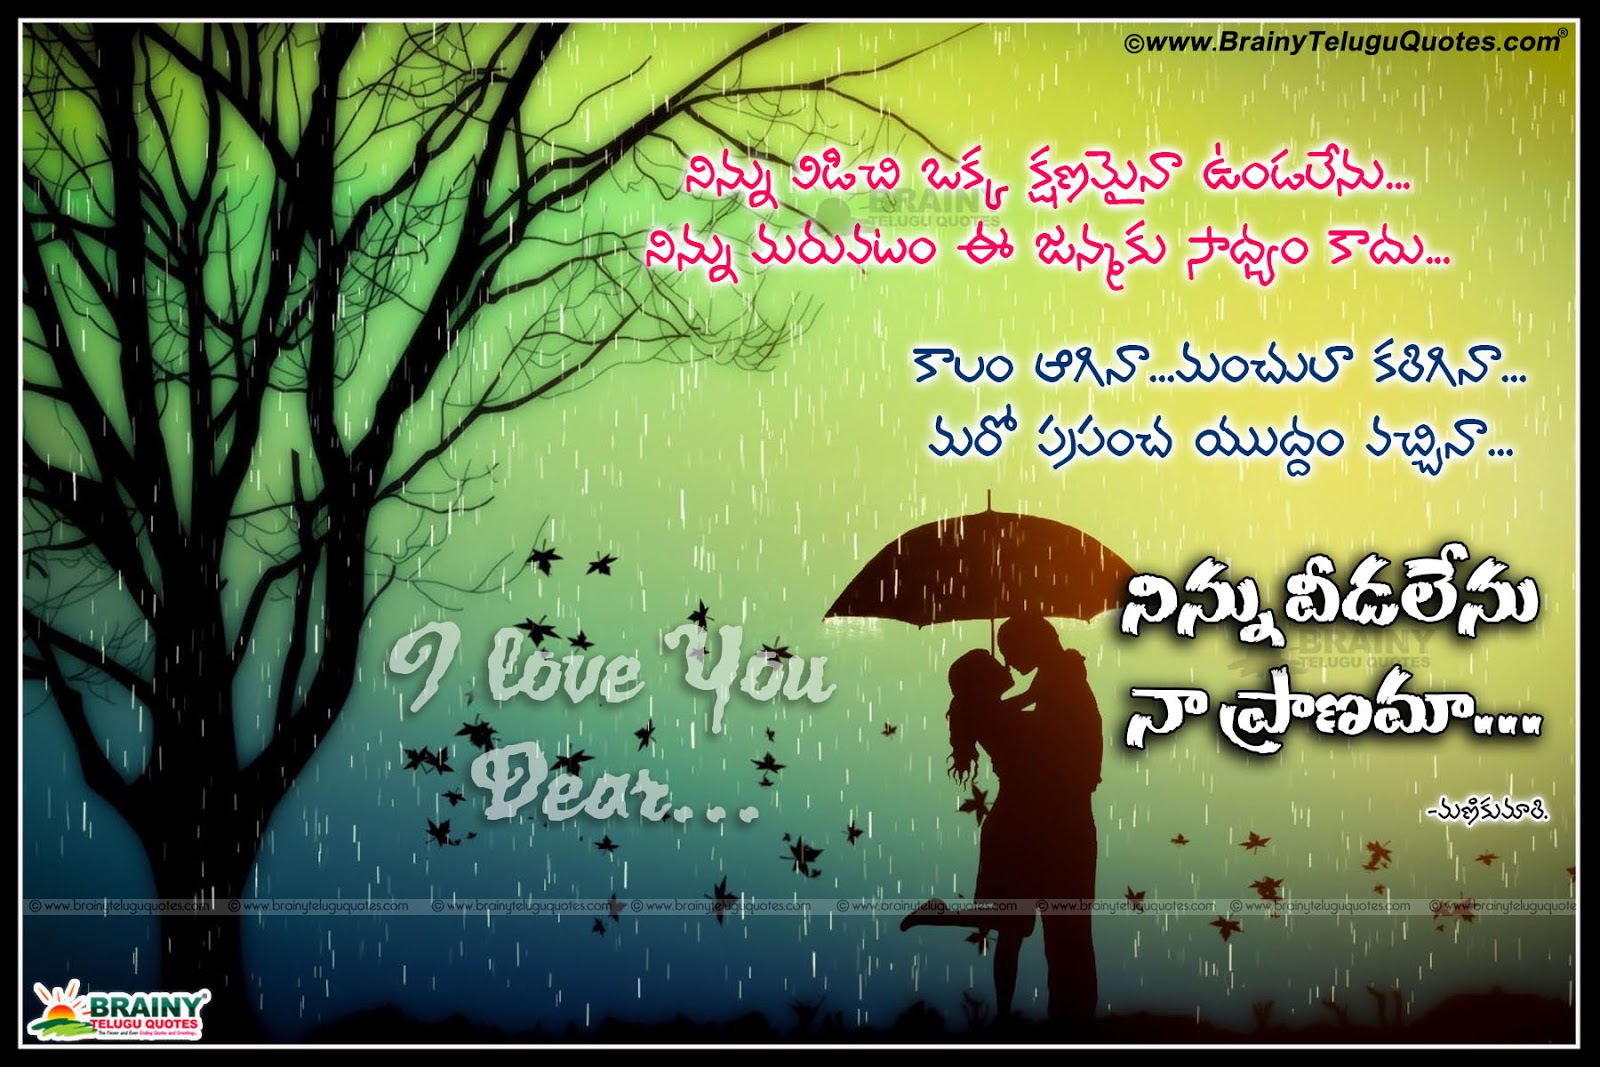 Romantic Love Quotes Images In Telugu Language - Romantic Cute Anime Couple , HD Wallpaper & Backgrounds